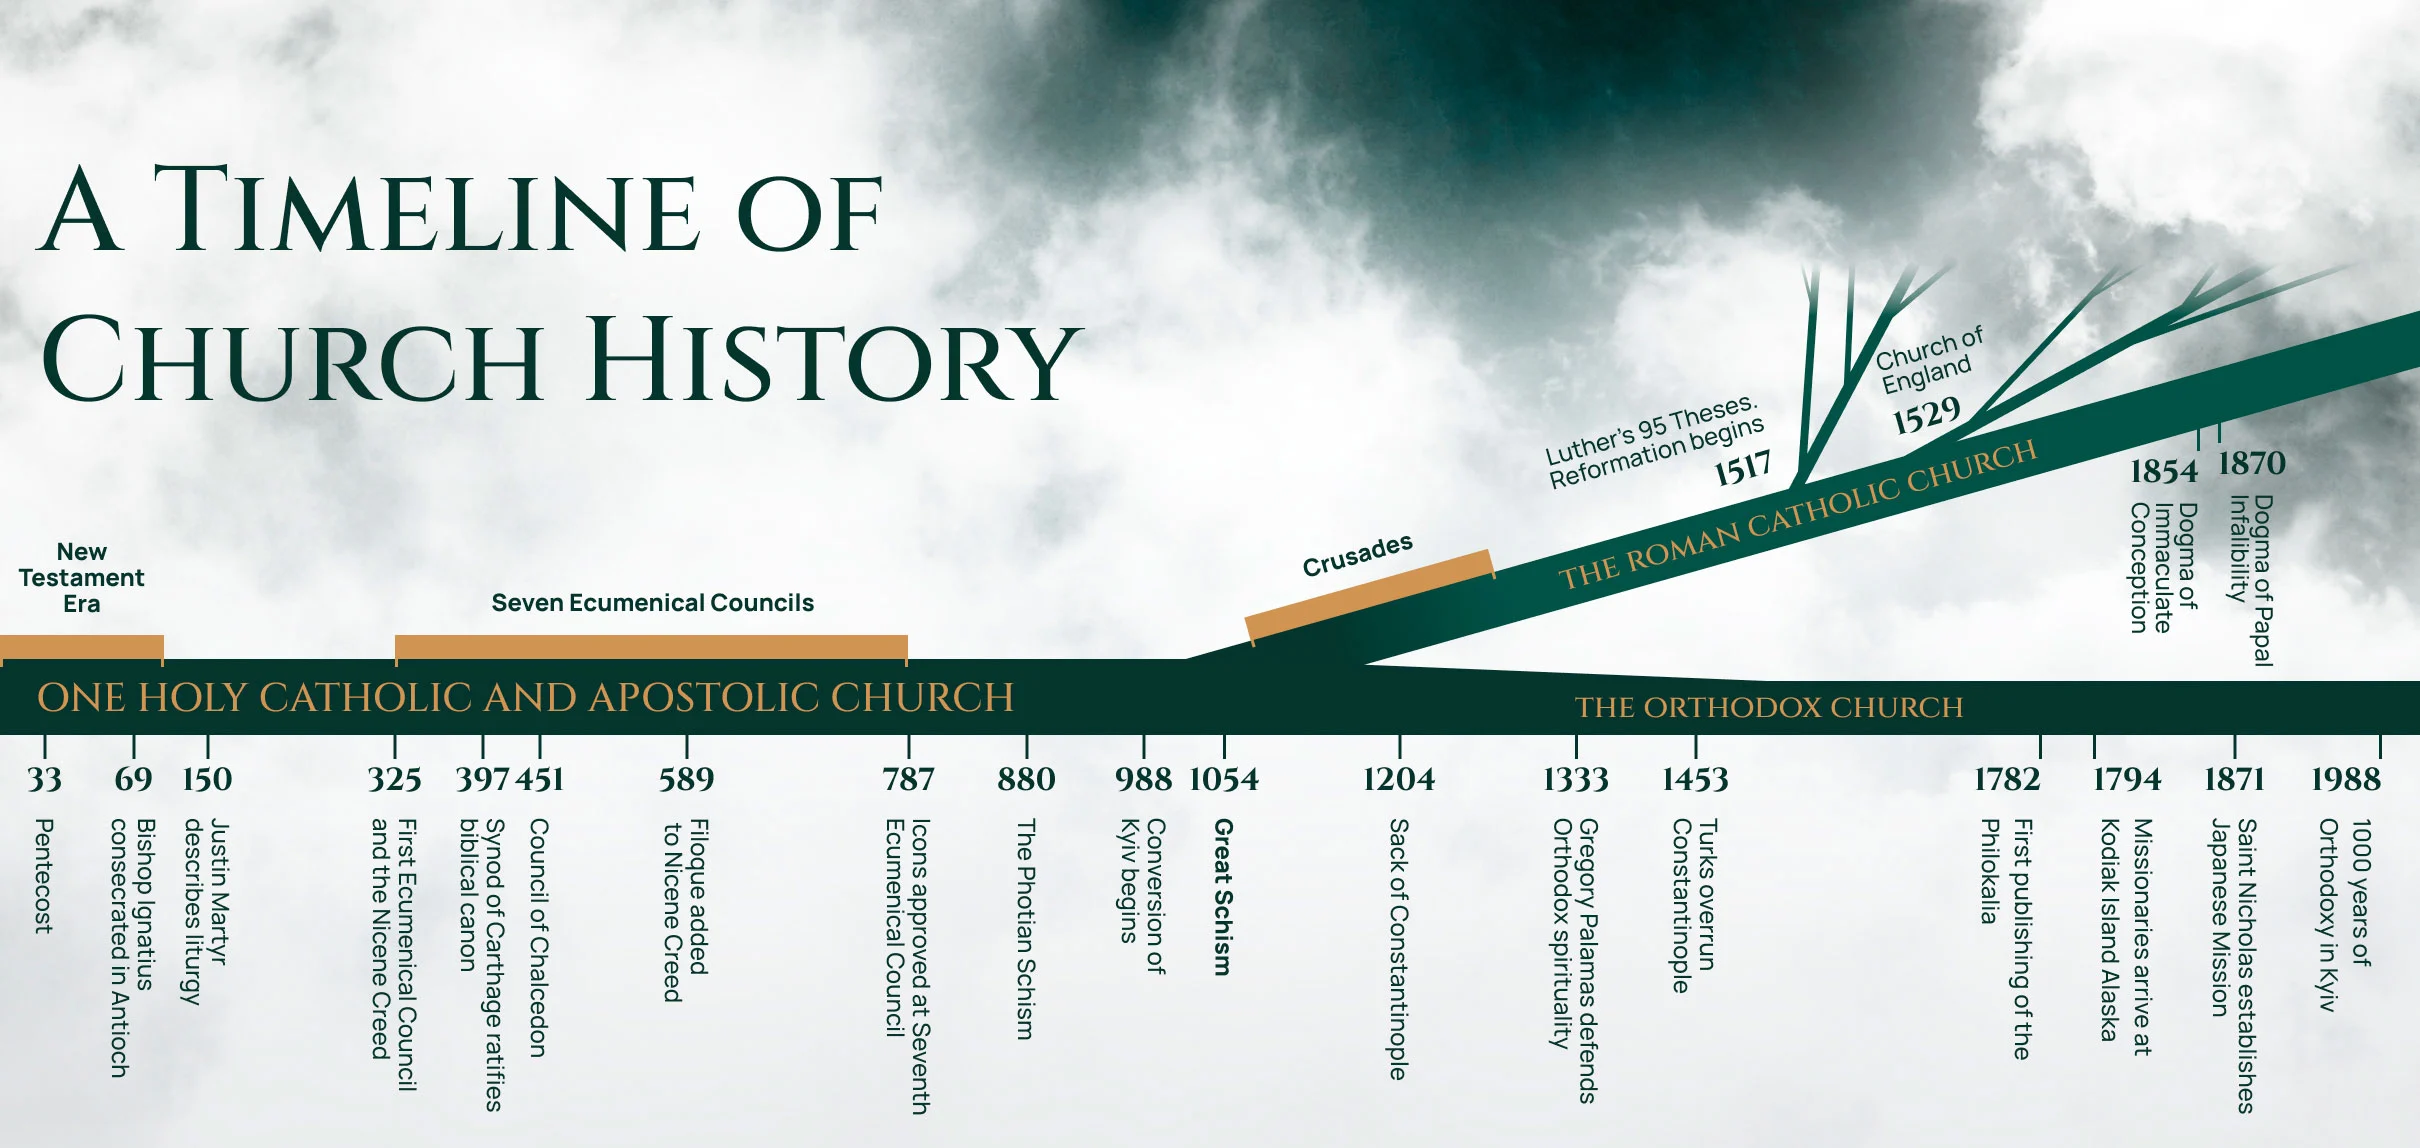 A Time Line of Church History